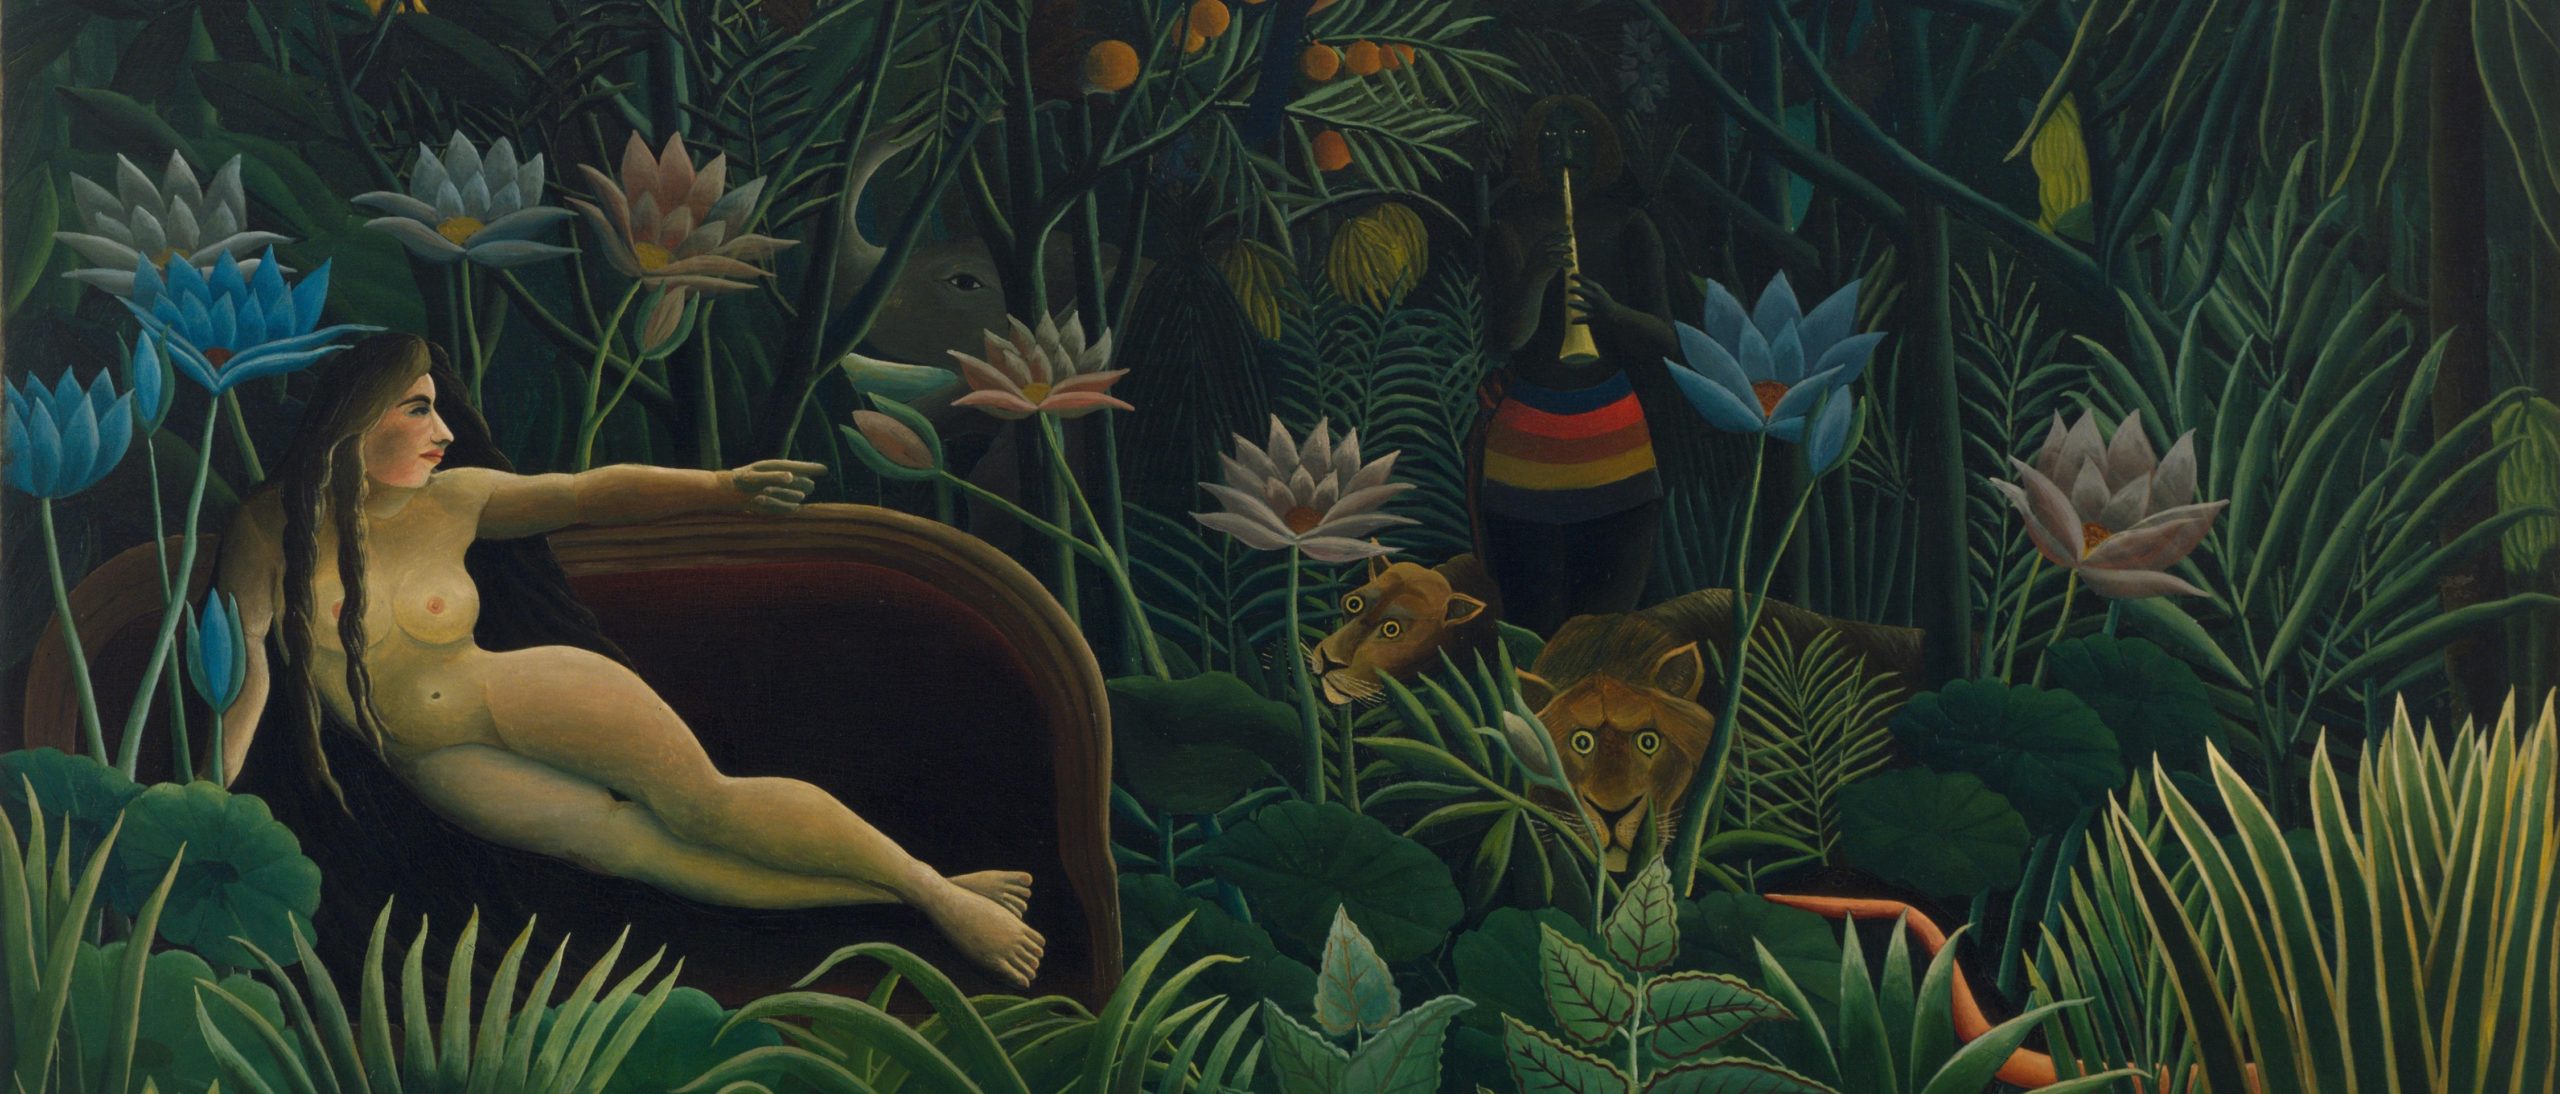 Henri Rousseau and the idea of the naÃ¯ve